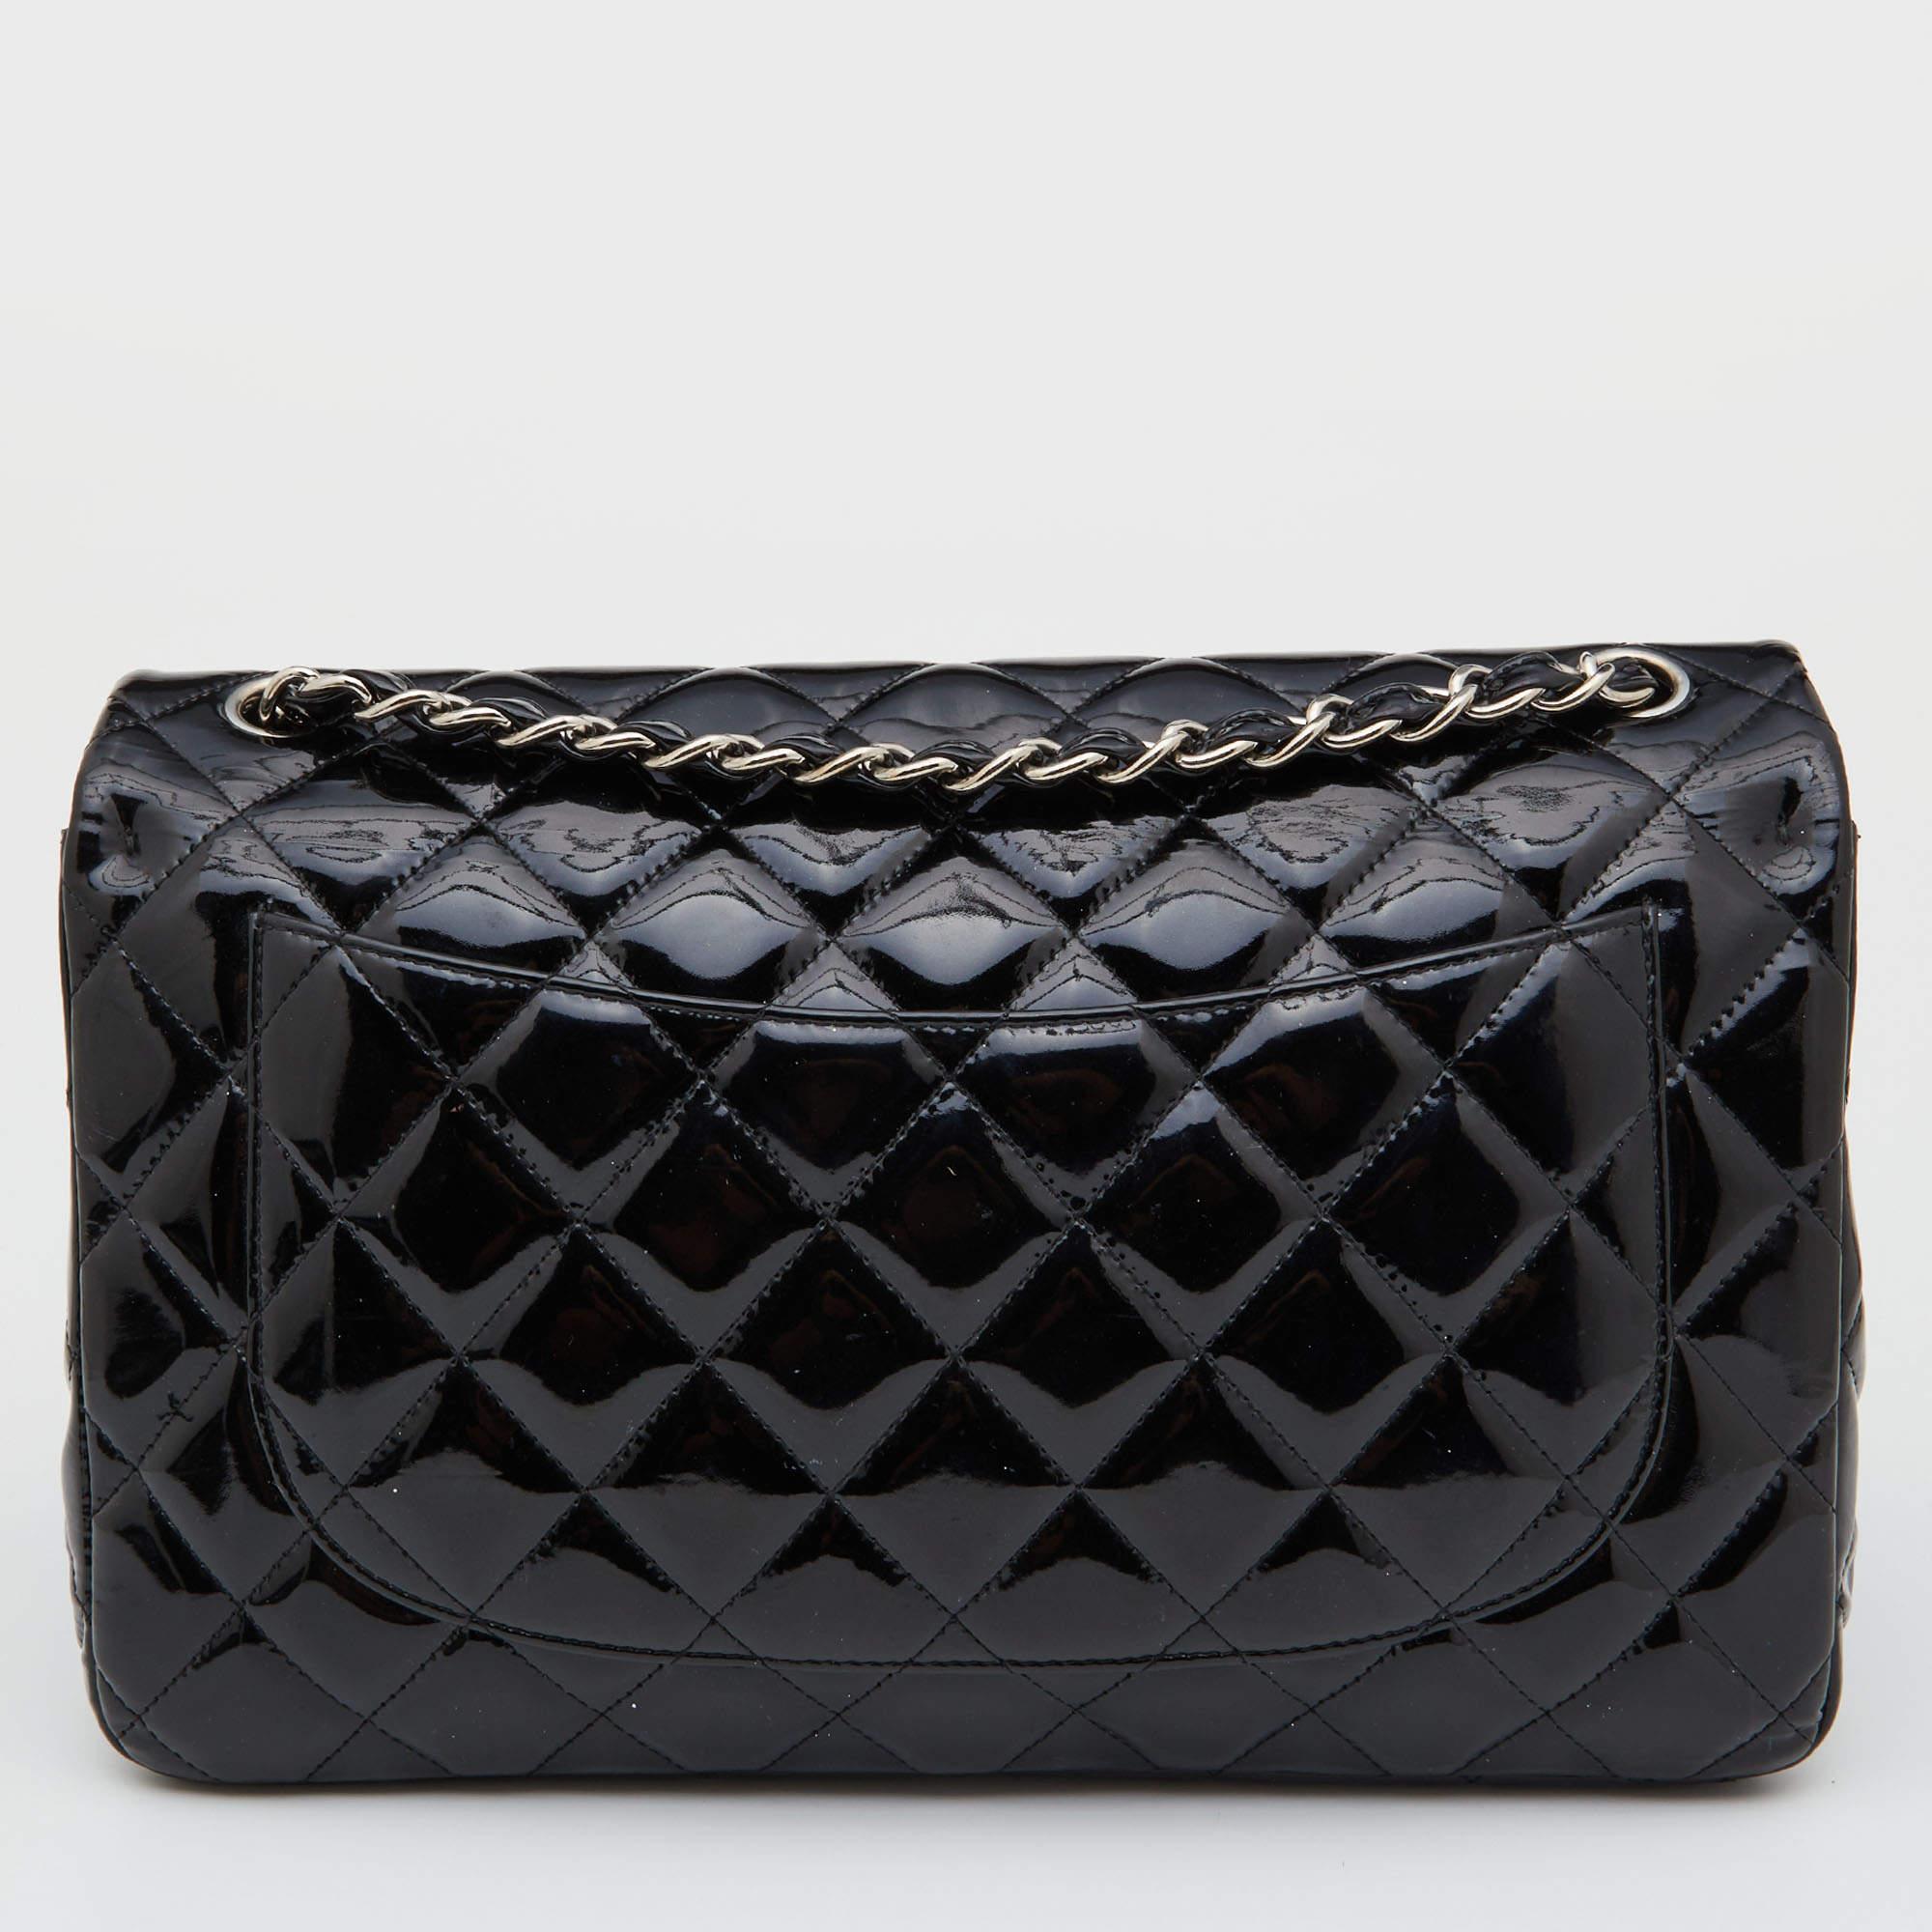 We're bringing Chanel's iconic Classic Flap bag to your closet with this creation. Exquisitely crafted from patent leather in their quilt design, it bears the signature label inside the leather interior and the iconic CC turn-lock on the flap. The